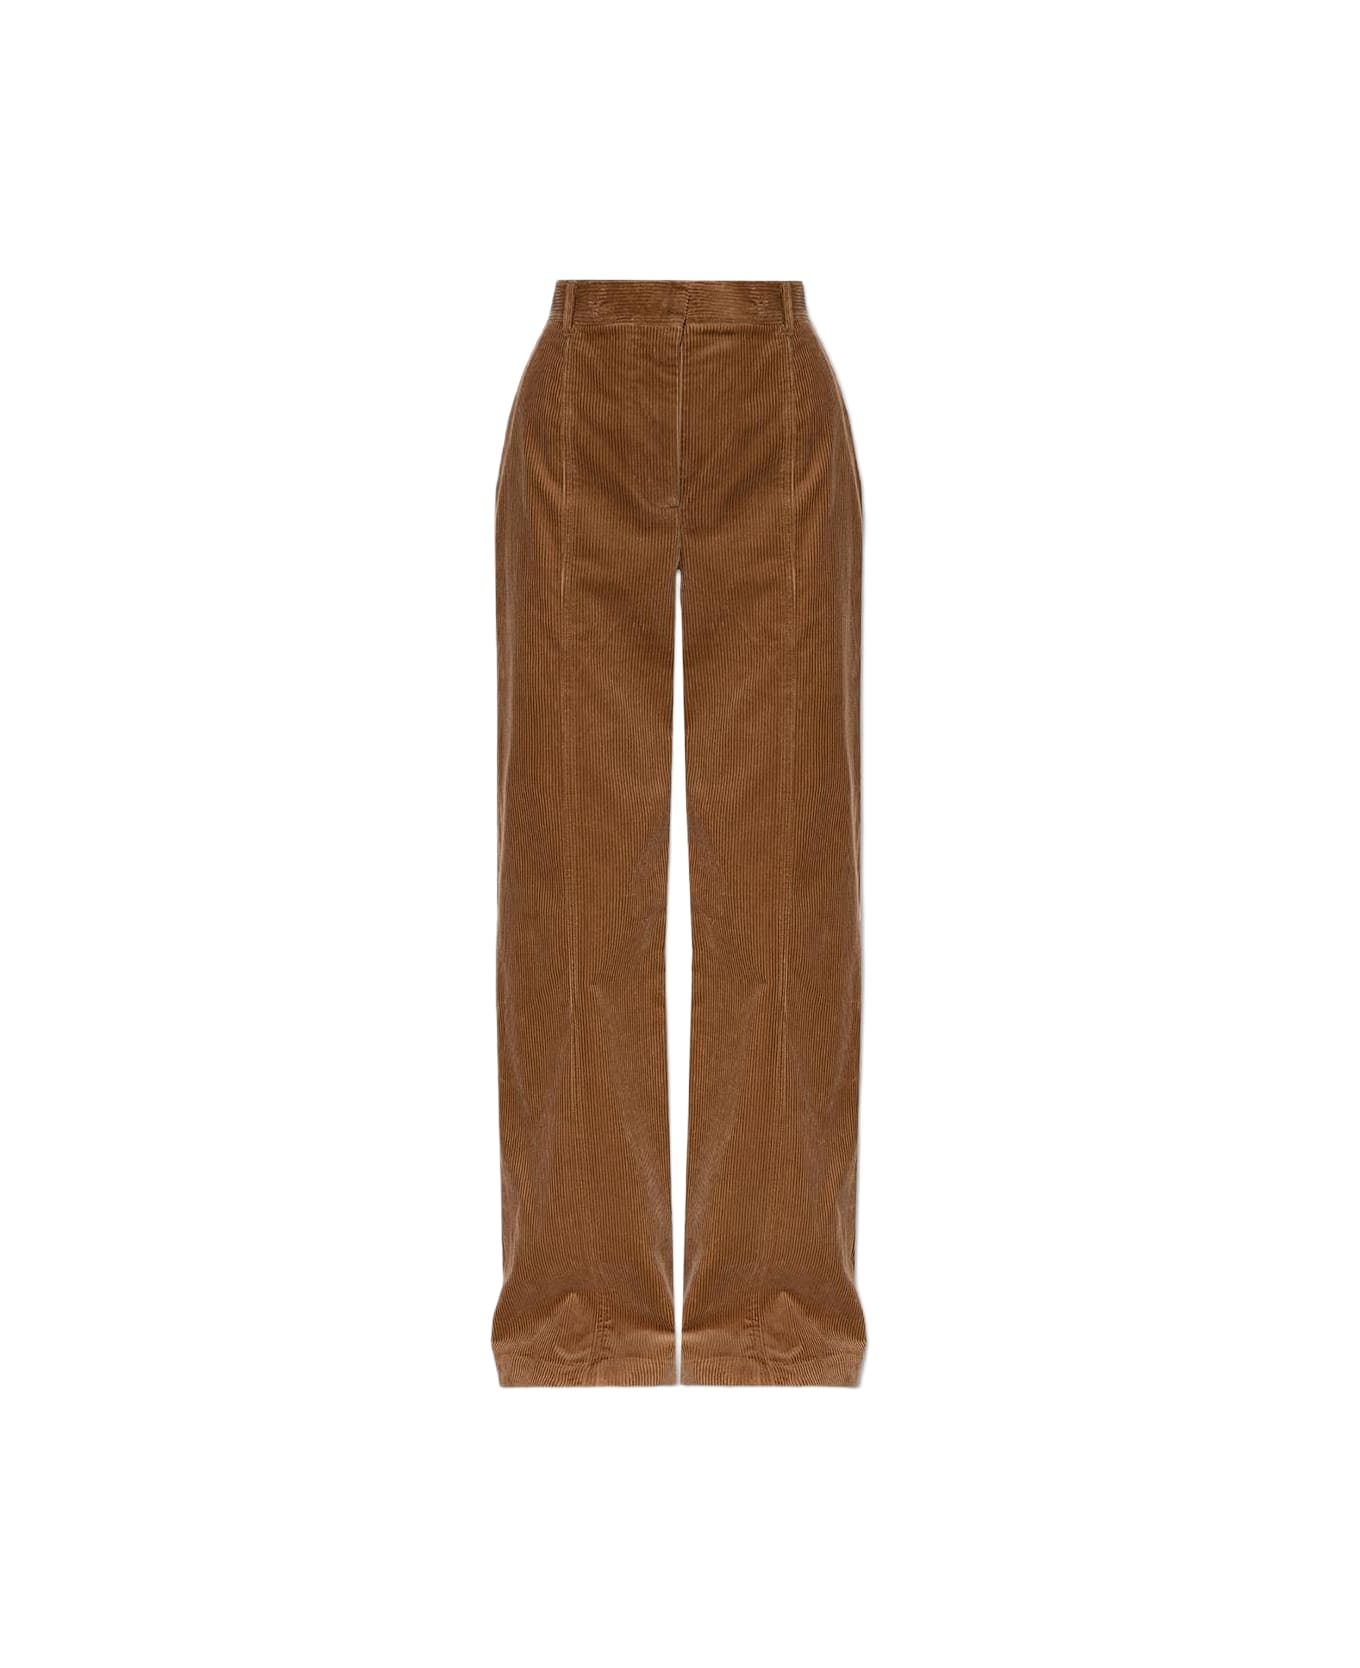 Burberry 'blakely' Corduroy Trousers - BROWN